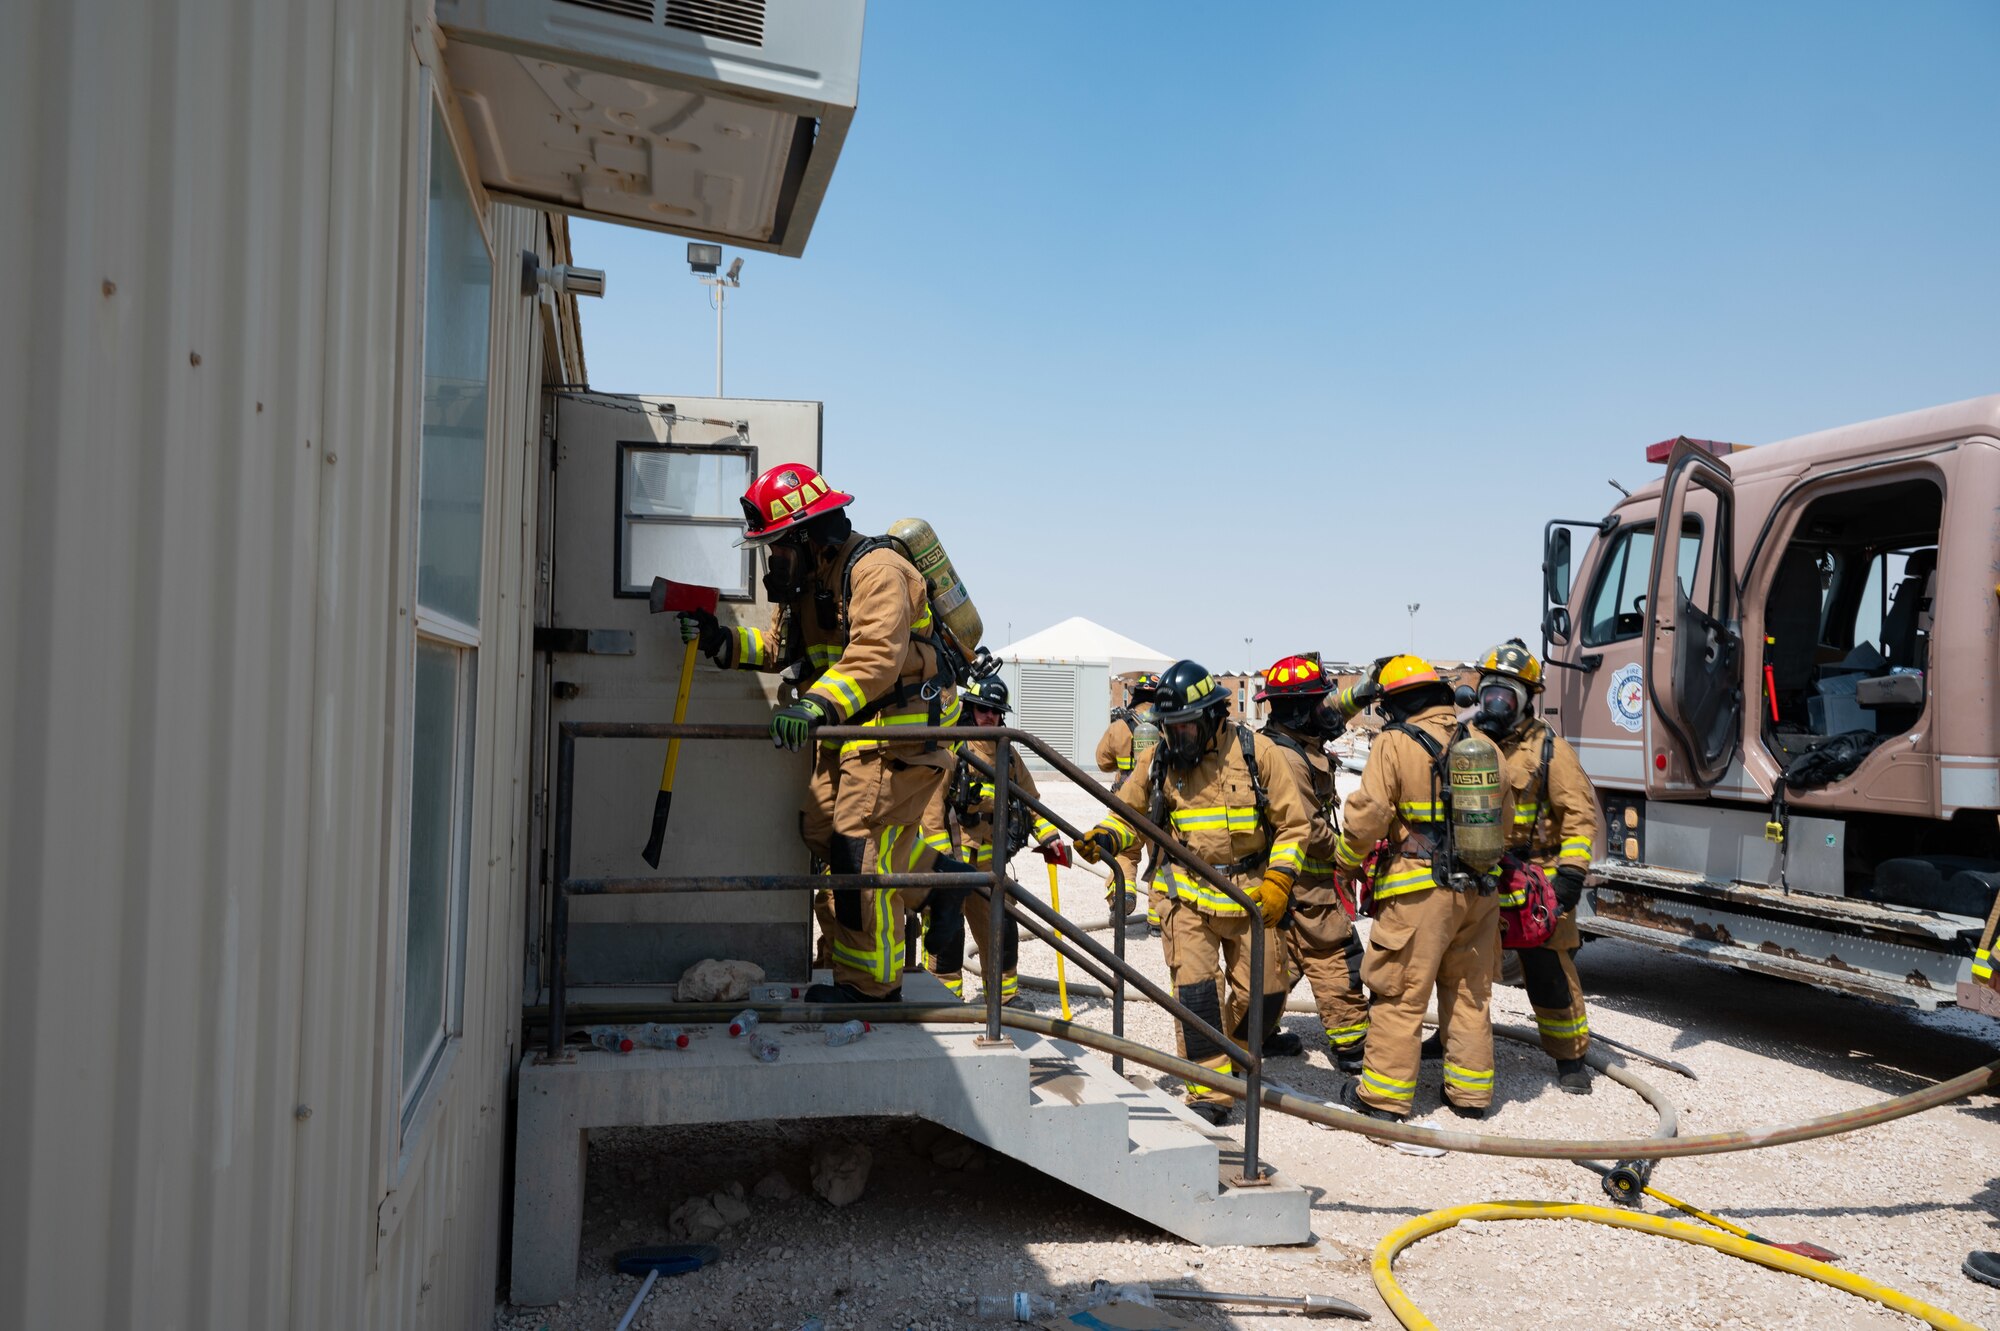 U.S. Air Force firefighters assigned to the 1st Expeditionary Civil Engineer Group, 577th Expeditionary Prime Beef Squadron, Quick Strike Team Fire enter a simulated hazardous environment during an exercise Aug. 30, 2022 at Al Udeid Air Base, Qatar. The firefighters practiced forcible entry techniques to enter a simulated immediate Danger to Life and Health environment to search for potential victims during an exercise. (U.S. Air Force photo by Staff Sgt. Dana Tourtellotte)